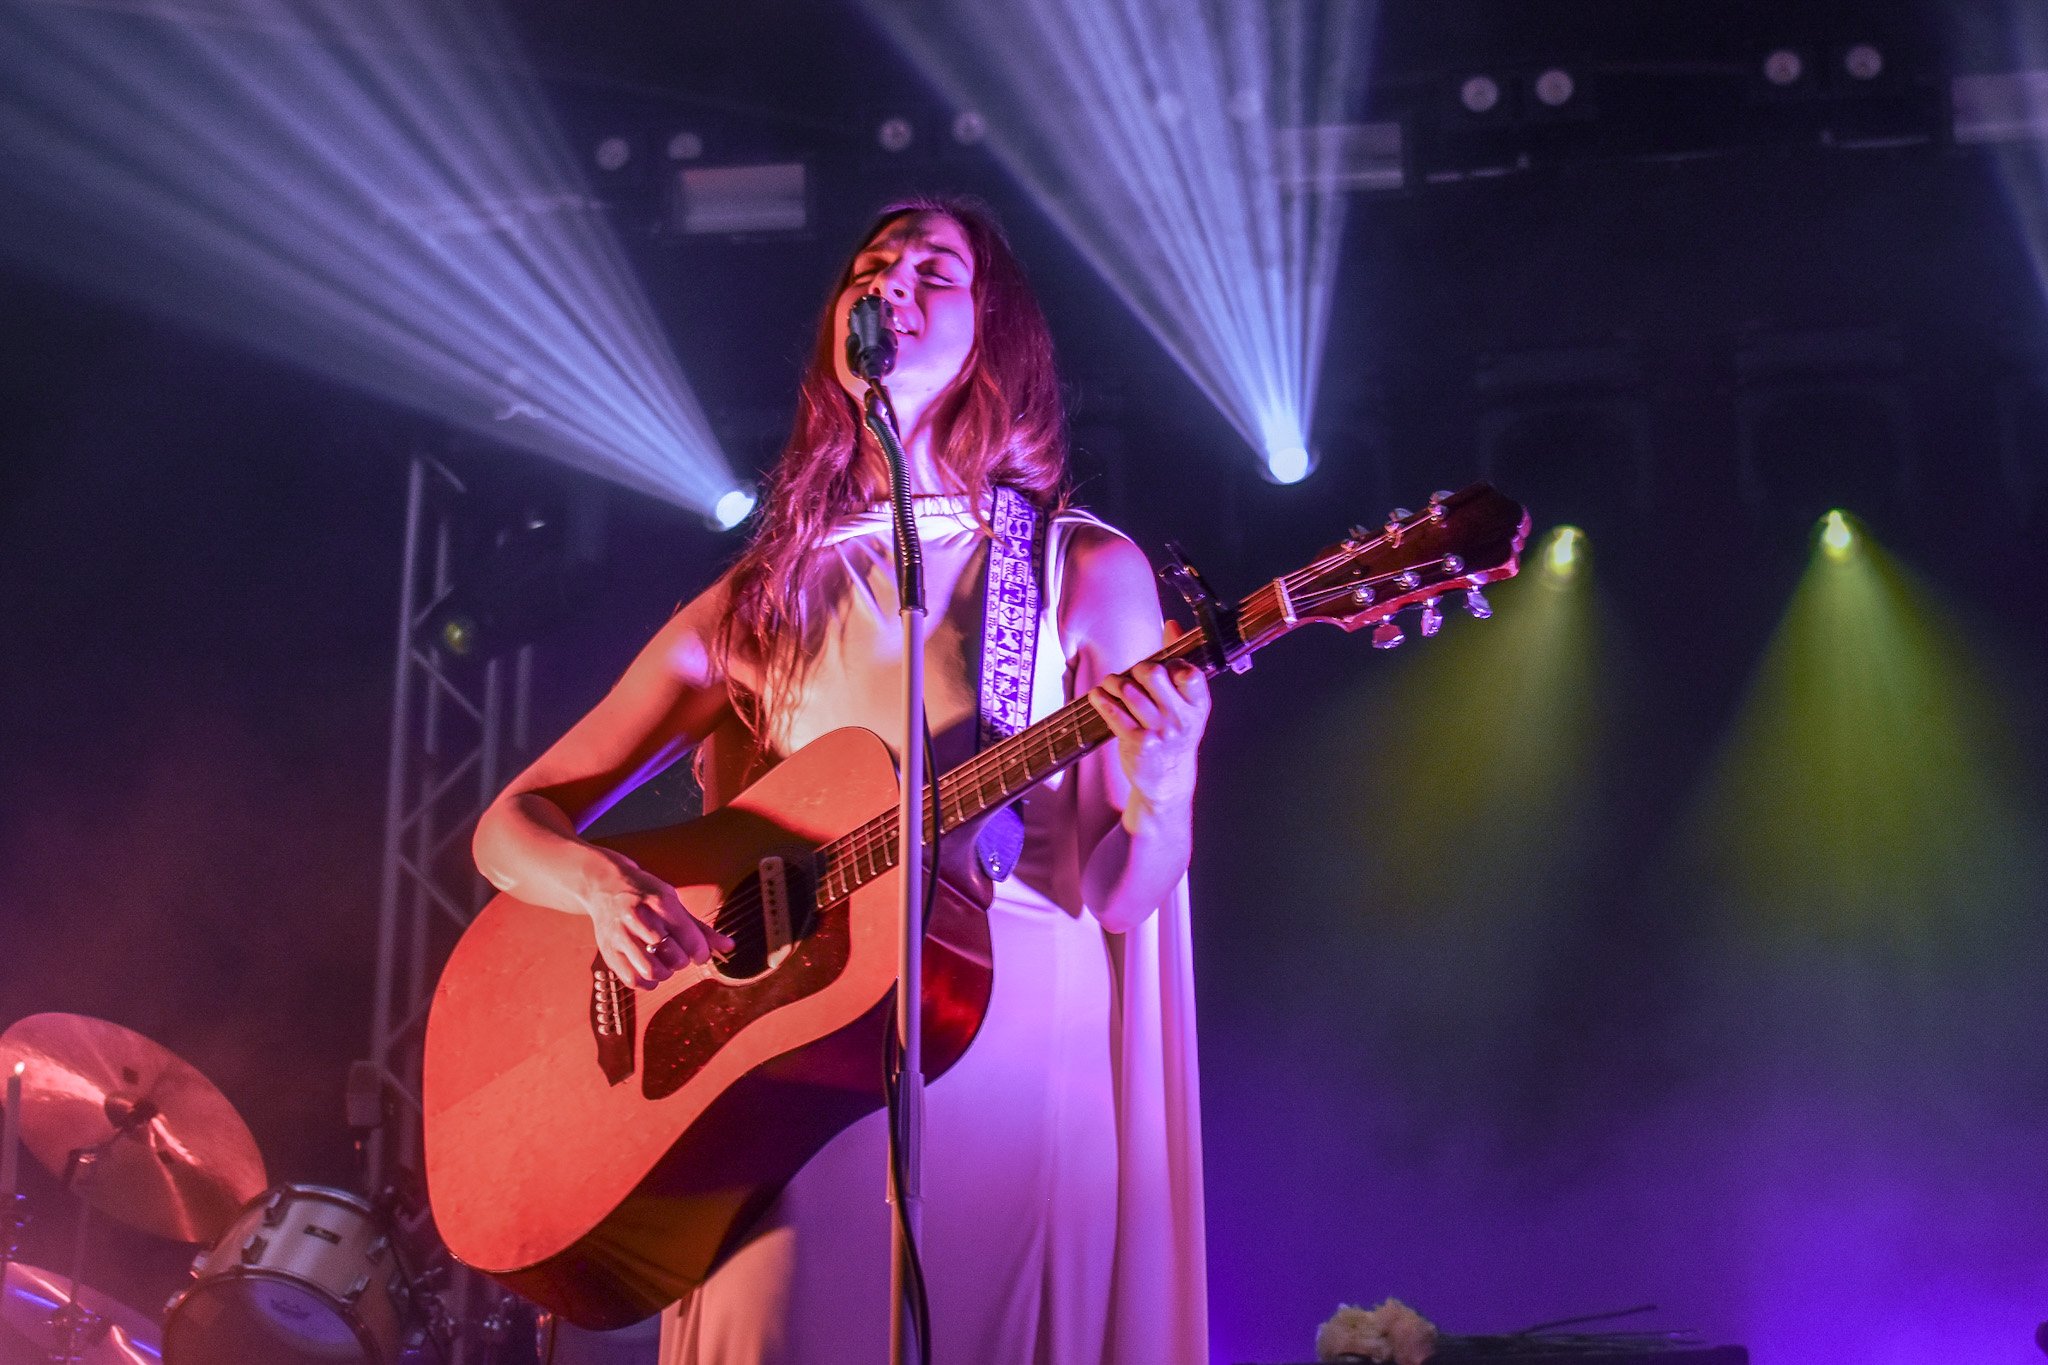  Weyes Blood changes from piano to acoustic guitar to perform “Wild Time.” 